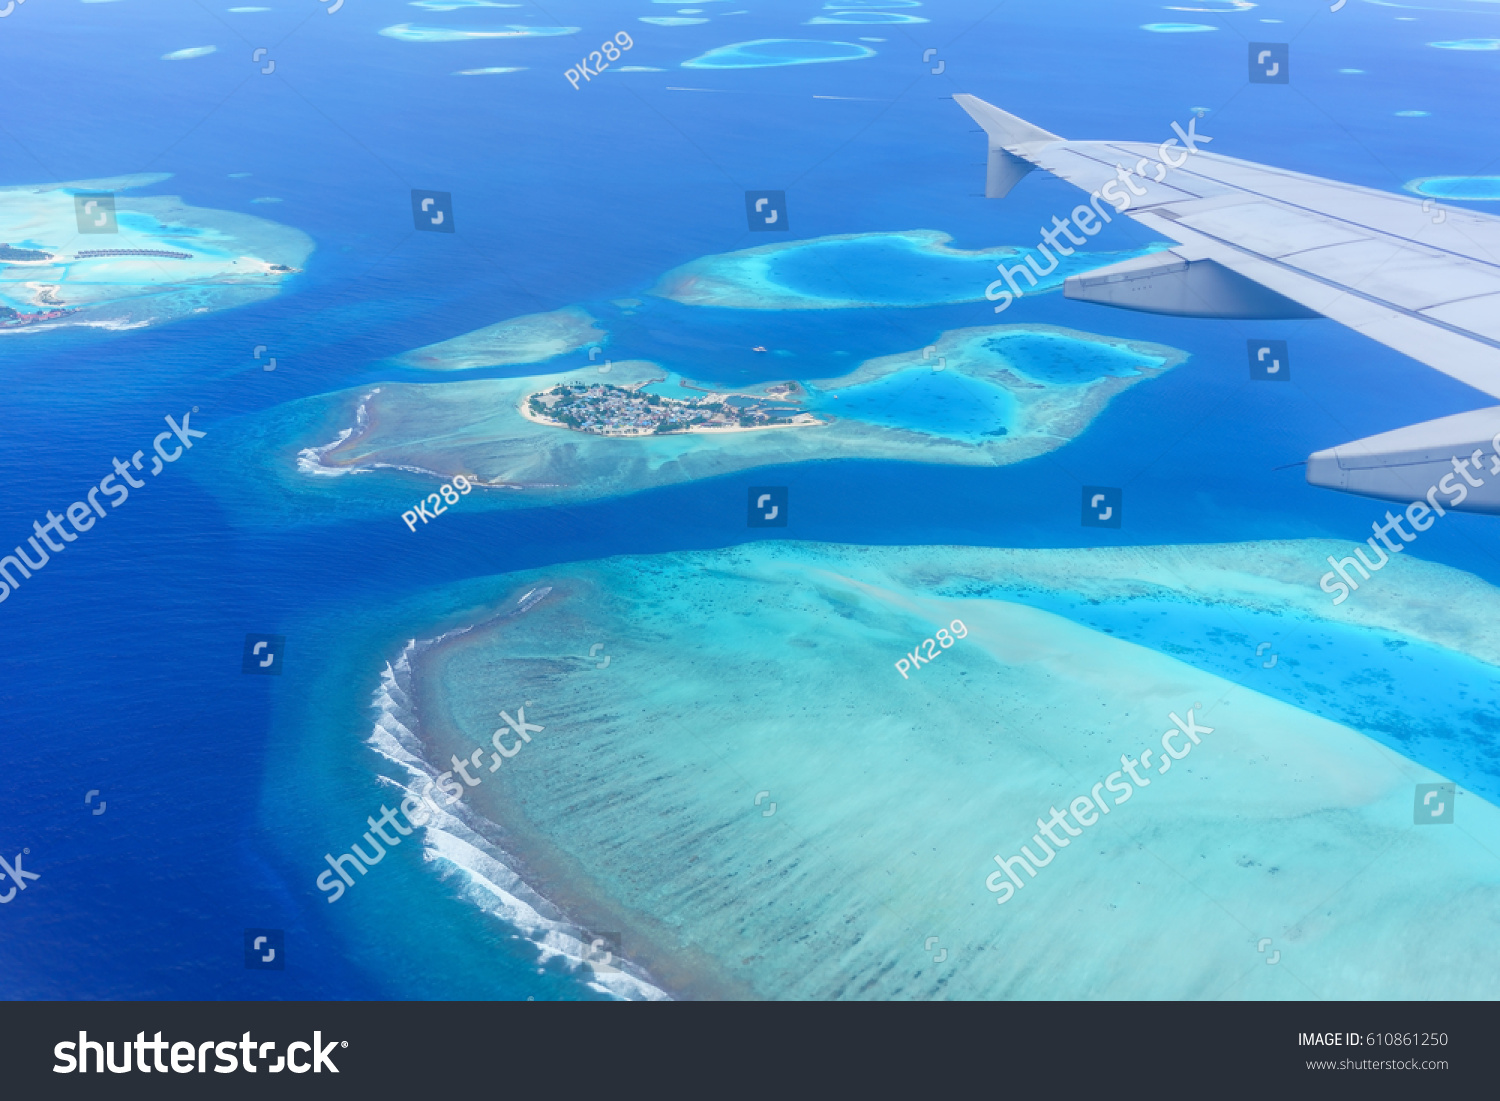 Scenery from airplane 's window seeing wing of airplane , white clouds , blue sky and Maldives islands  #610861250